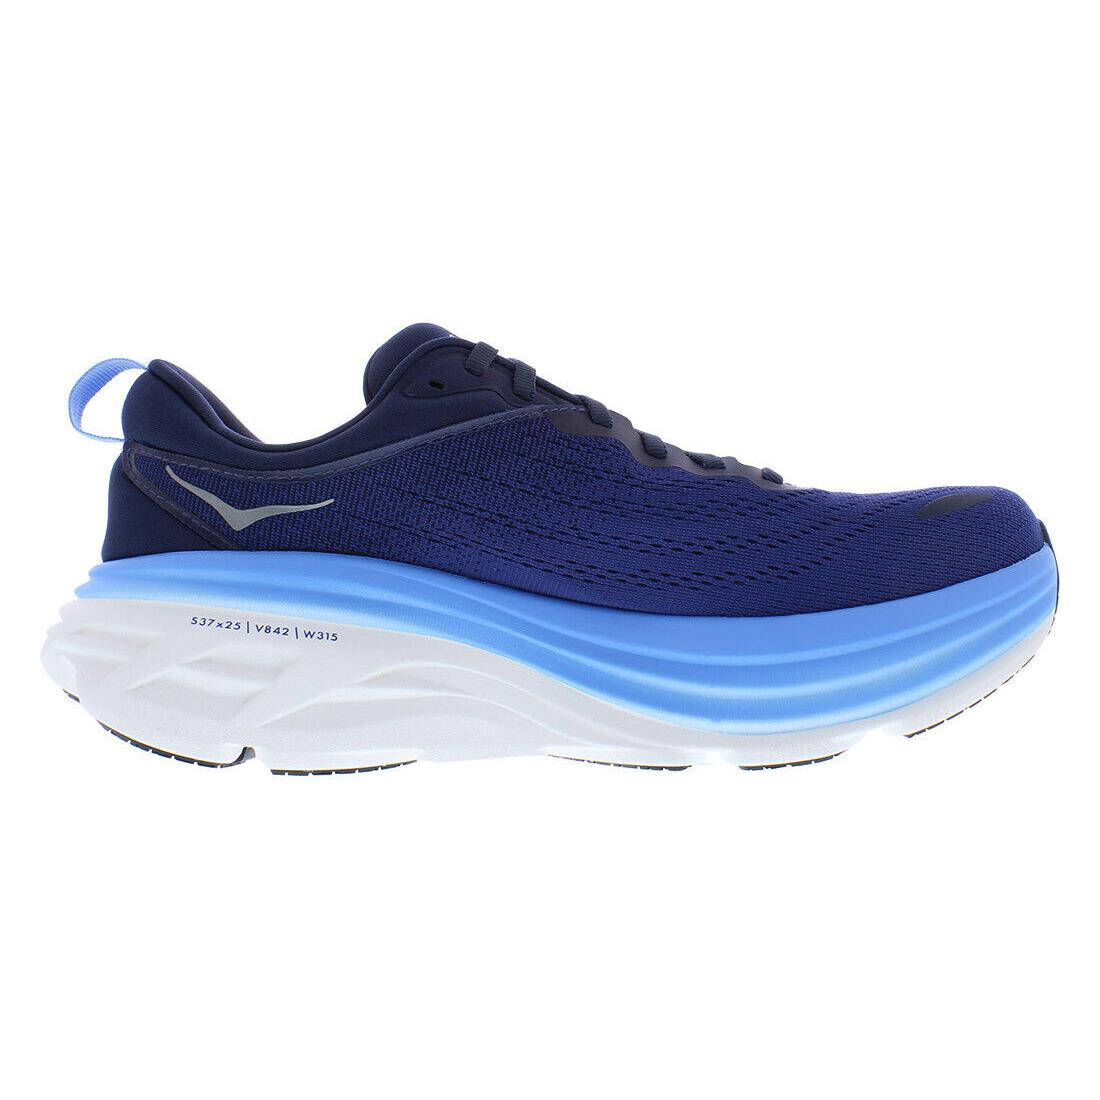 Hoka One One Bondi 8 Mens Shoes Size 9.5 Color: Outer Space/all Aboard